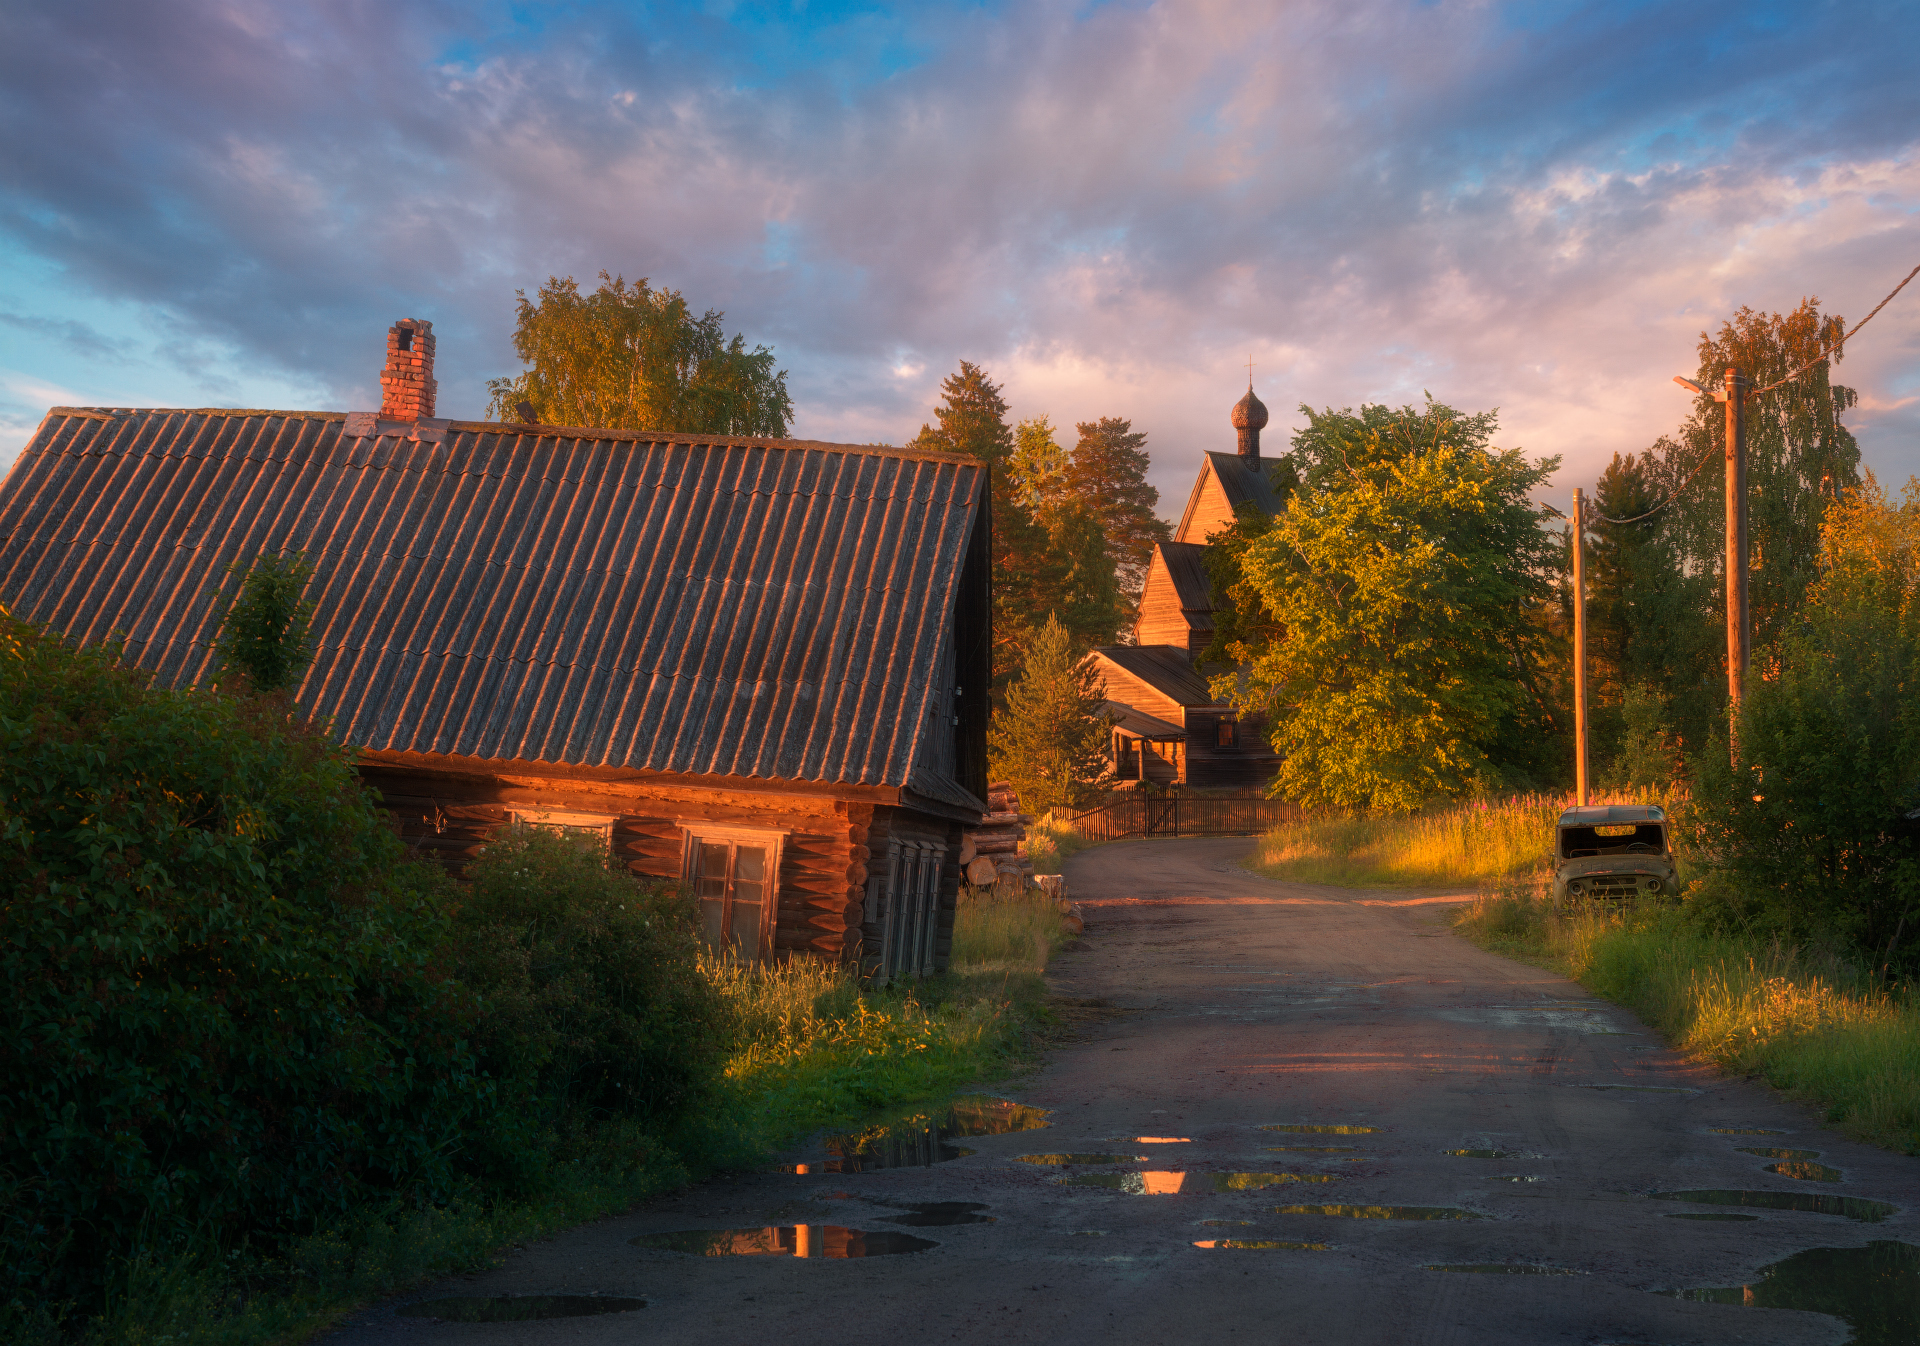 Sunset time - My, The photo, Travel across Russia, Landscape, Podporozhye, Evening, Village, Church, Road, Veps forest